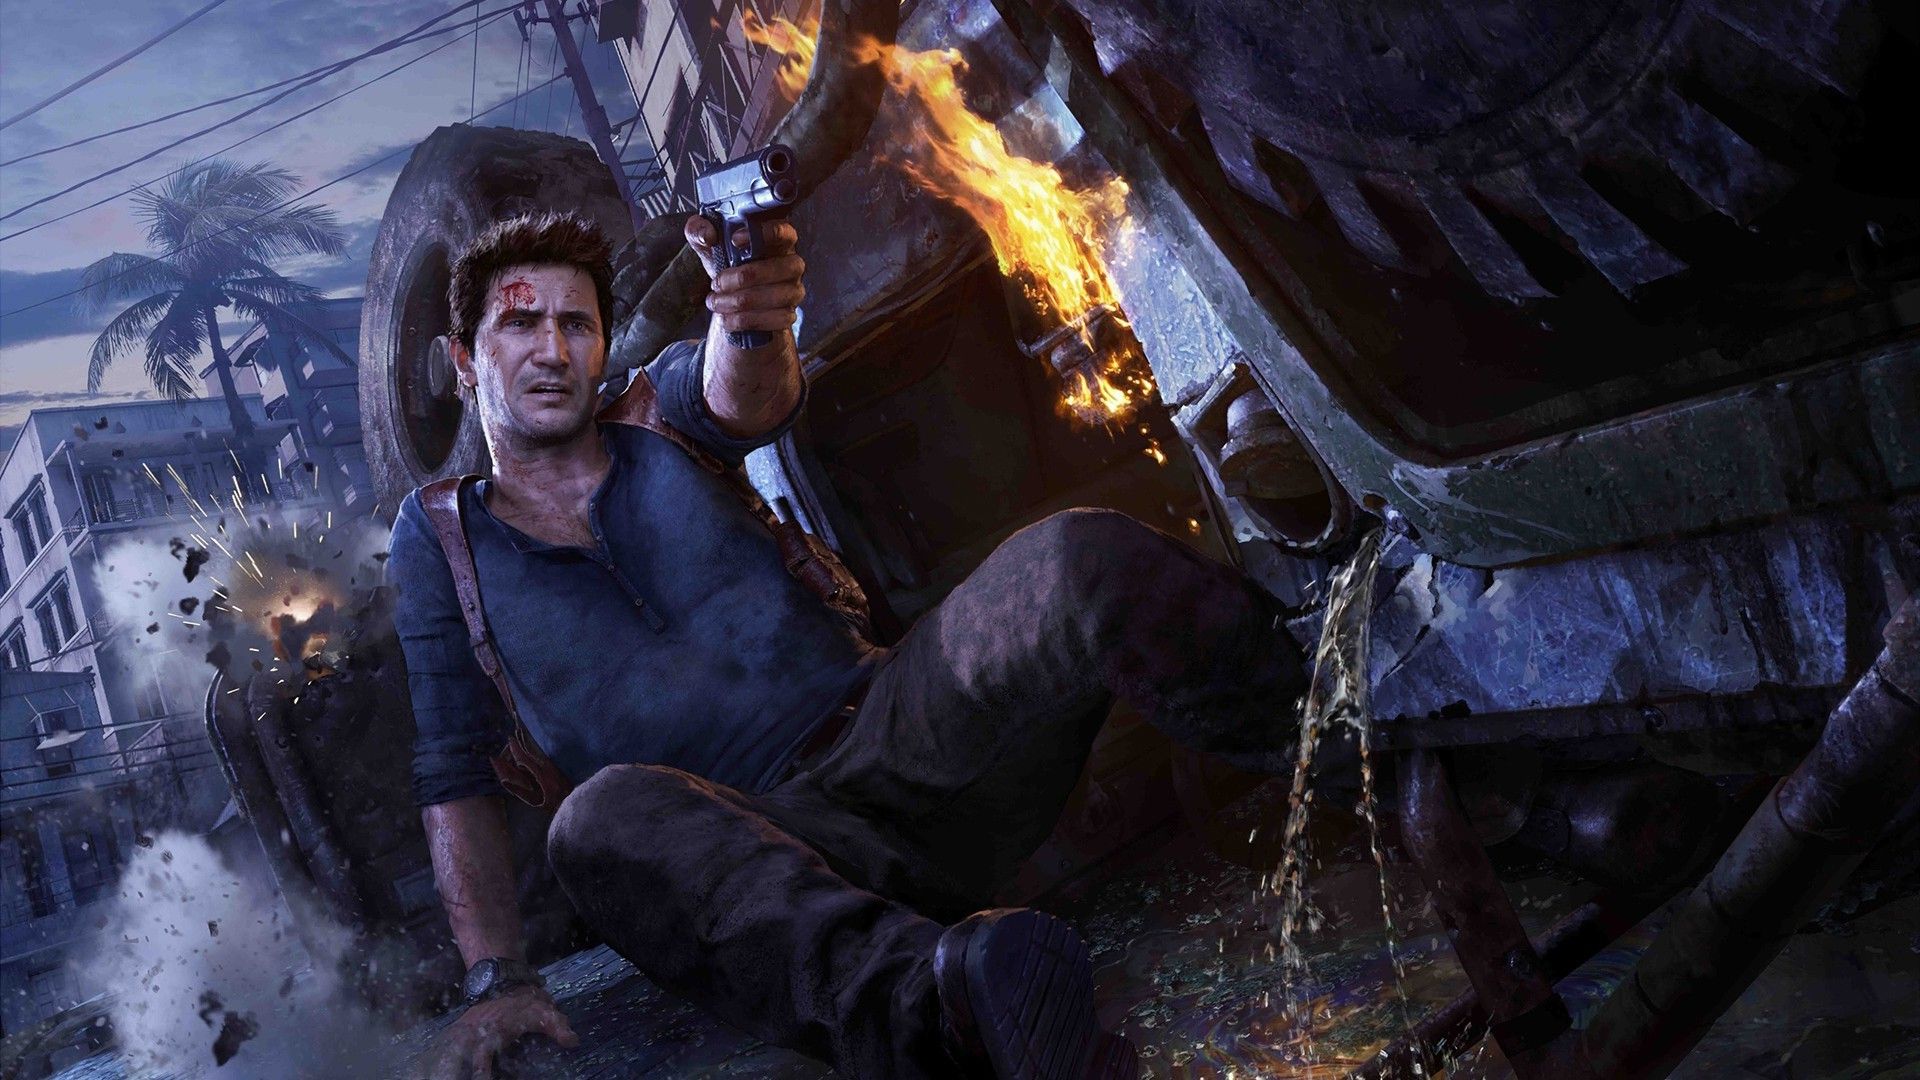 Uncharted 4 Thief's End Nathan PS4 PS3 XBOX ONE 360 POSTER MADE IN USA  - EXT349 | eBay